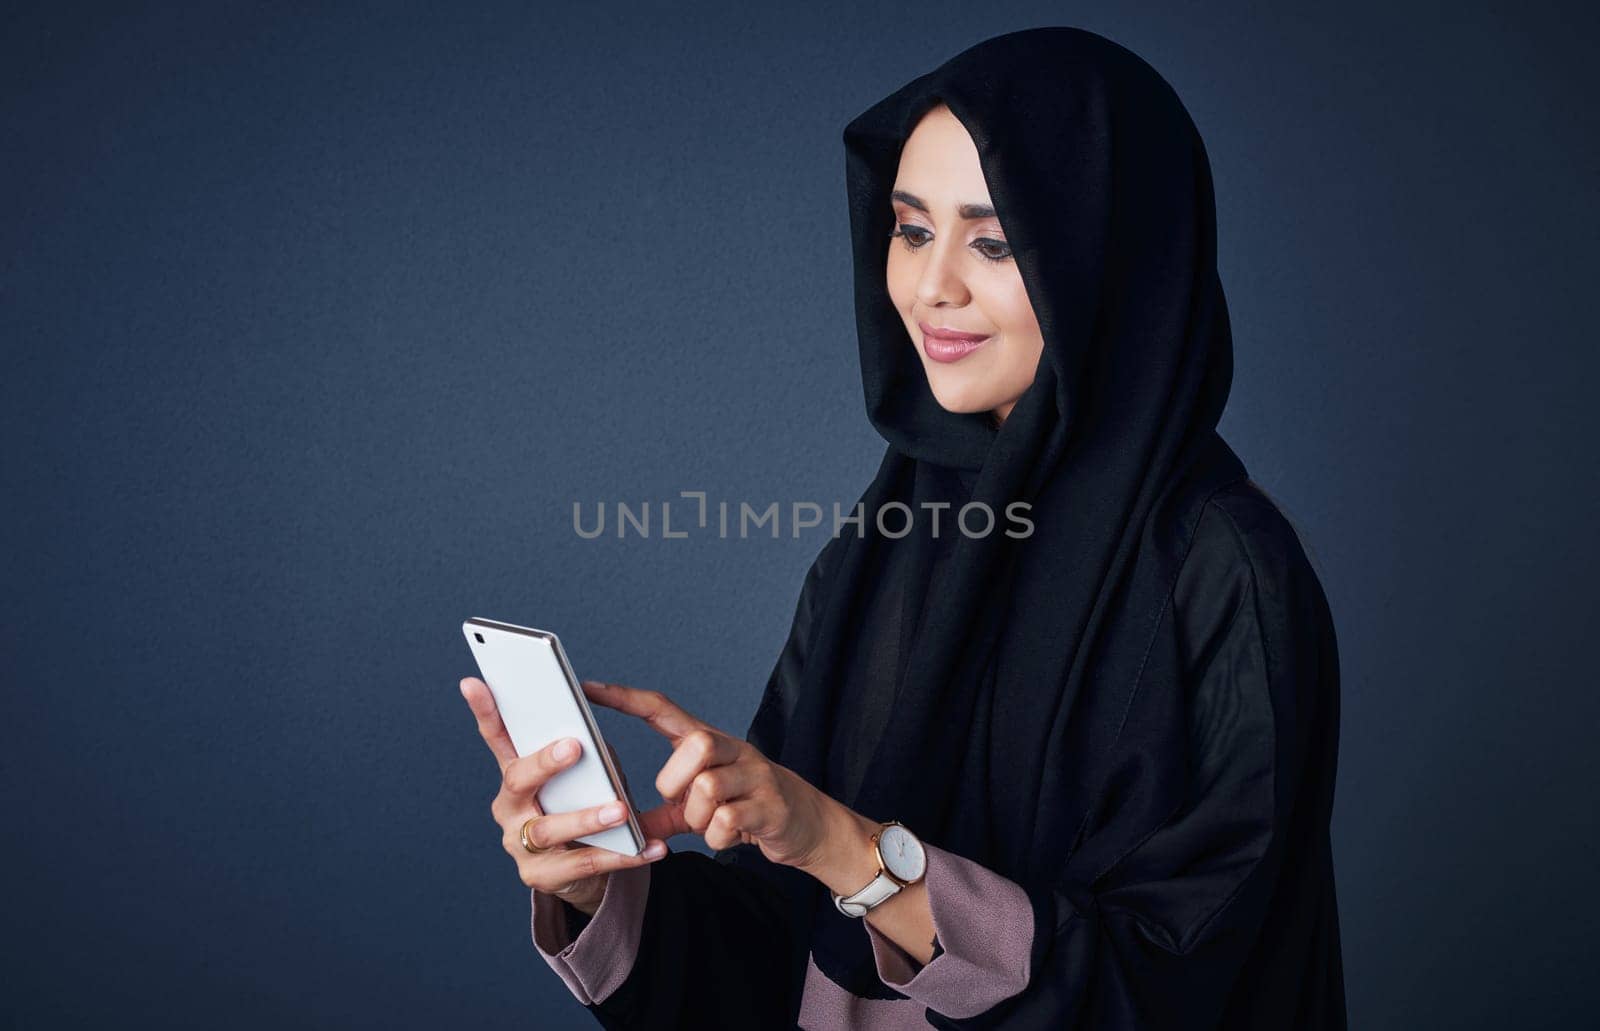 The smartest way of communication for her. Studio shot of a young woman wearing a burqa and using a mobile phone against a gray background